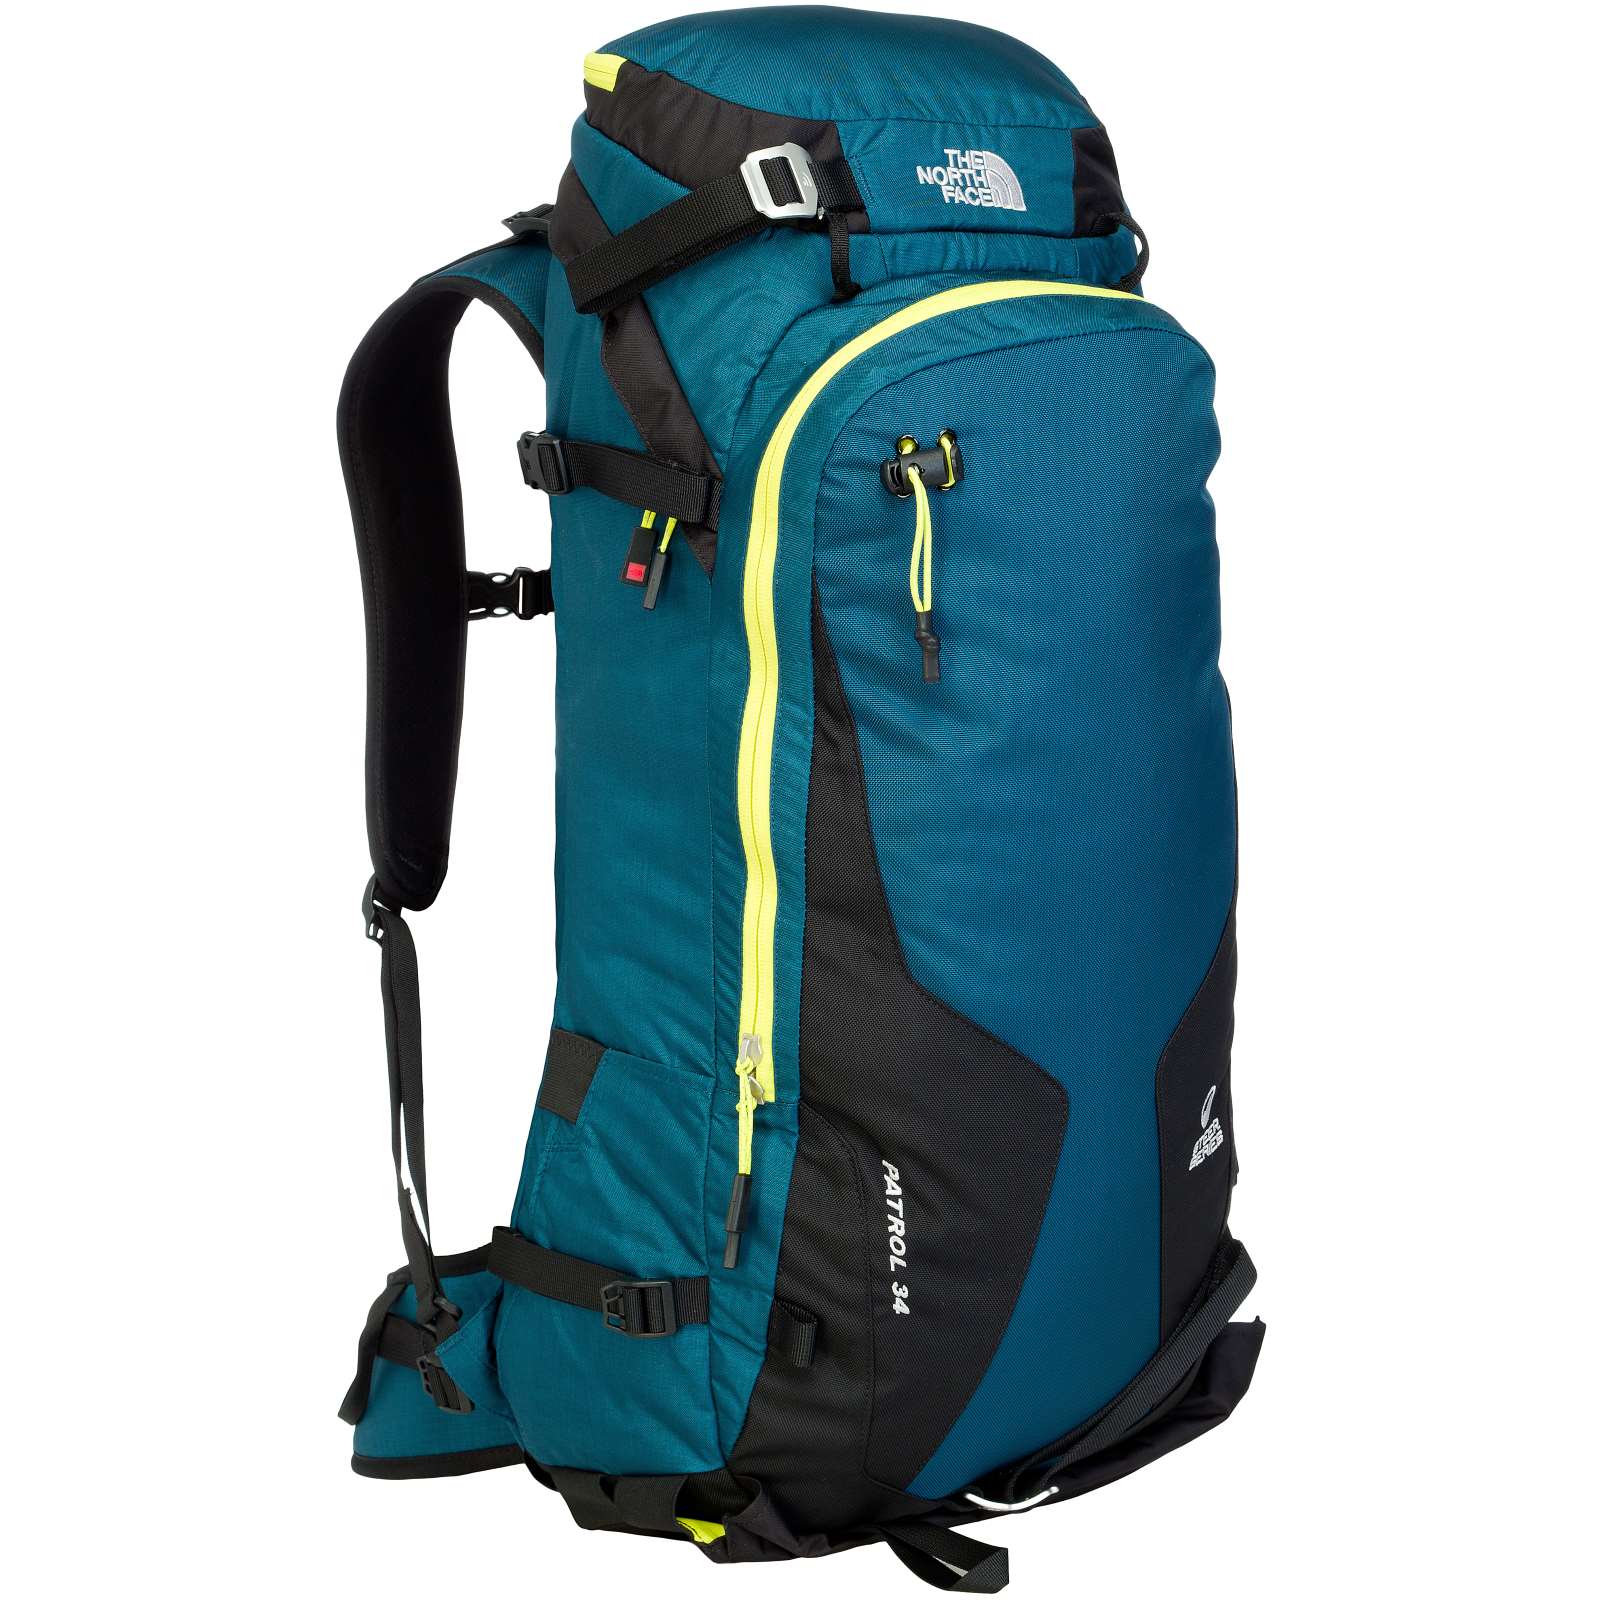 Buy The North Face Patrol 34 from Outnorth